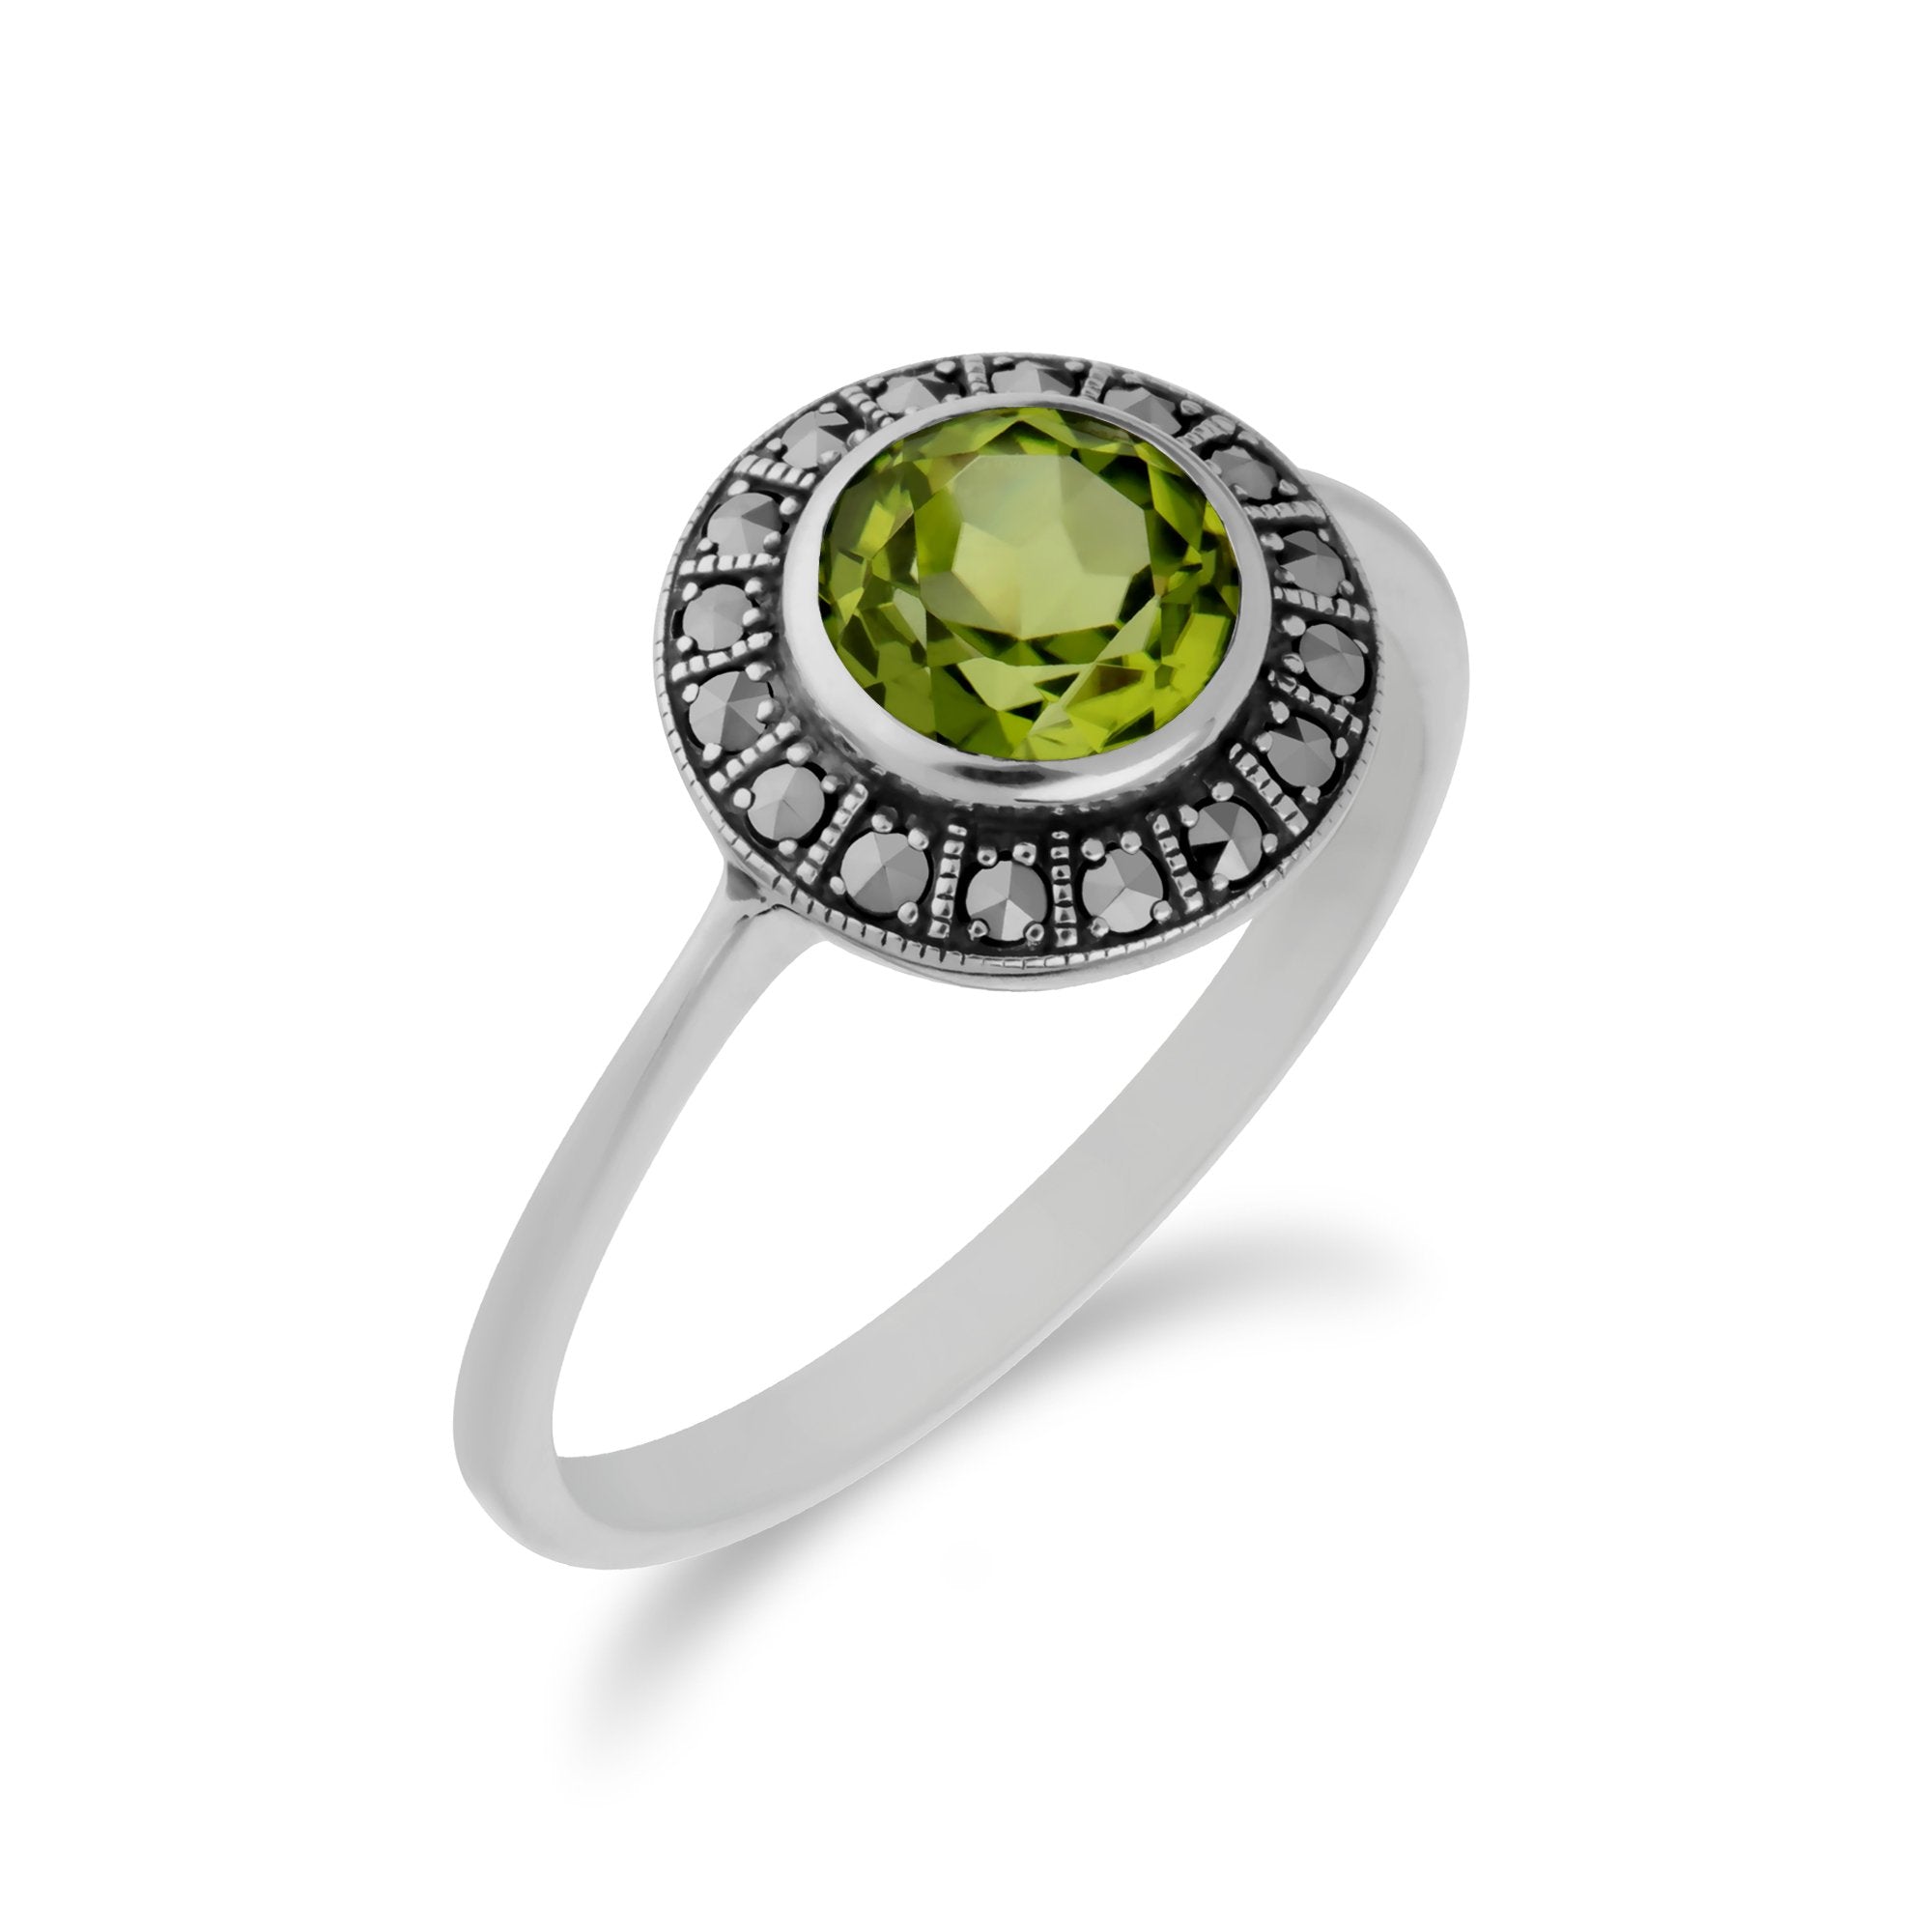 Art Deco Style Round Peridot & Marcasite Halo Ring in 925 Sterling Silver